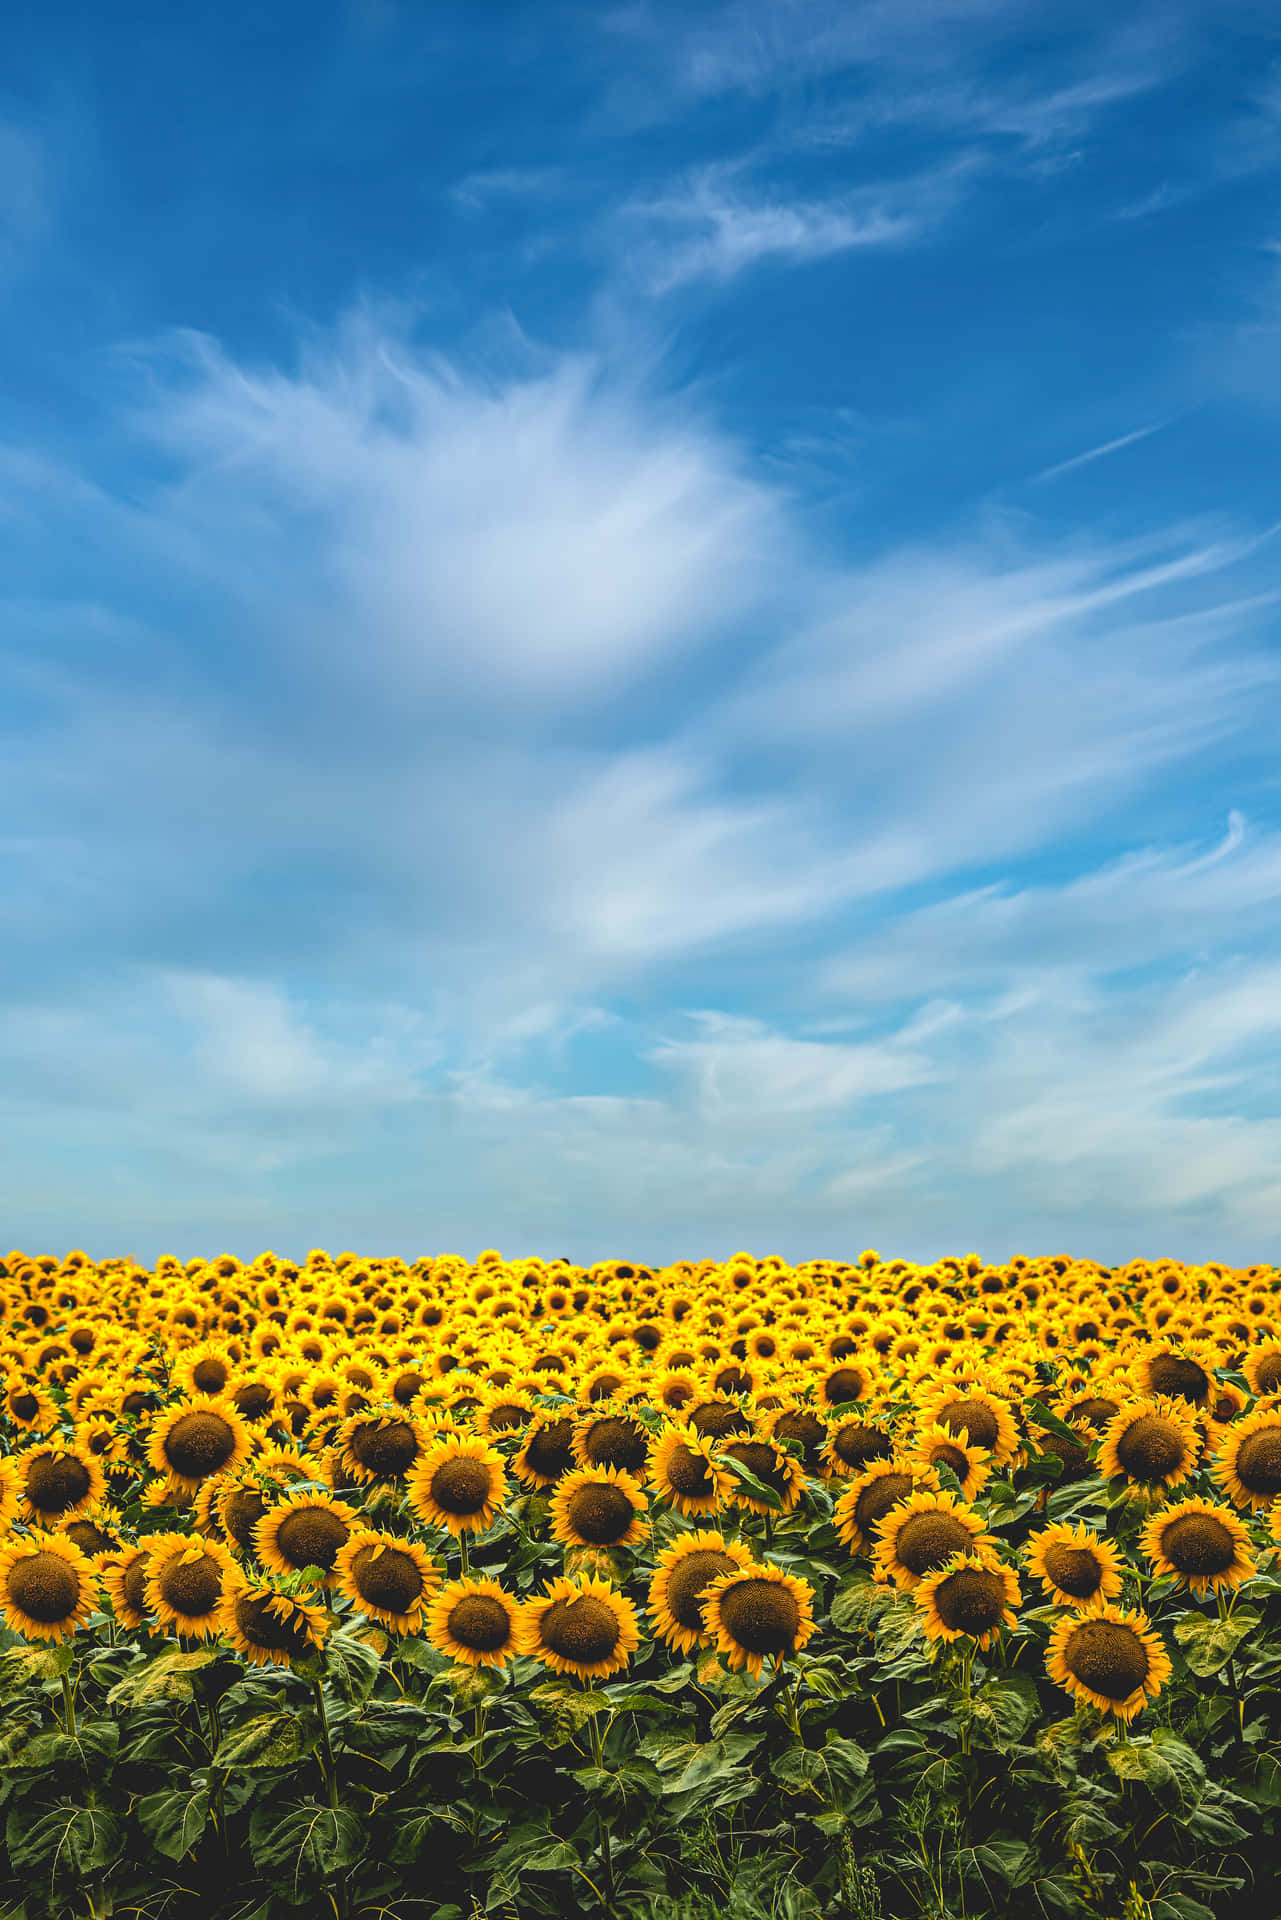 A beautiful yellow sunflower with a detailed aesthetic Wallpaper